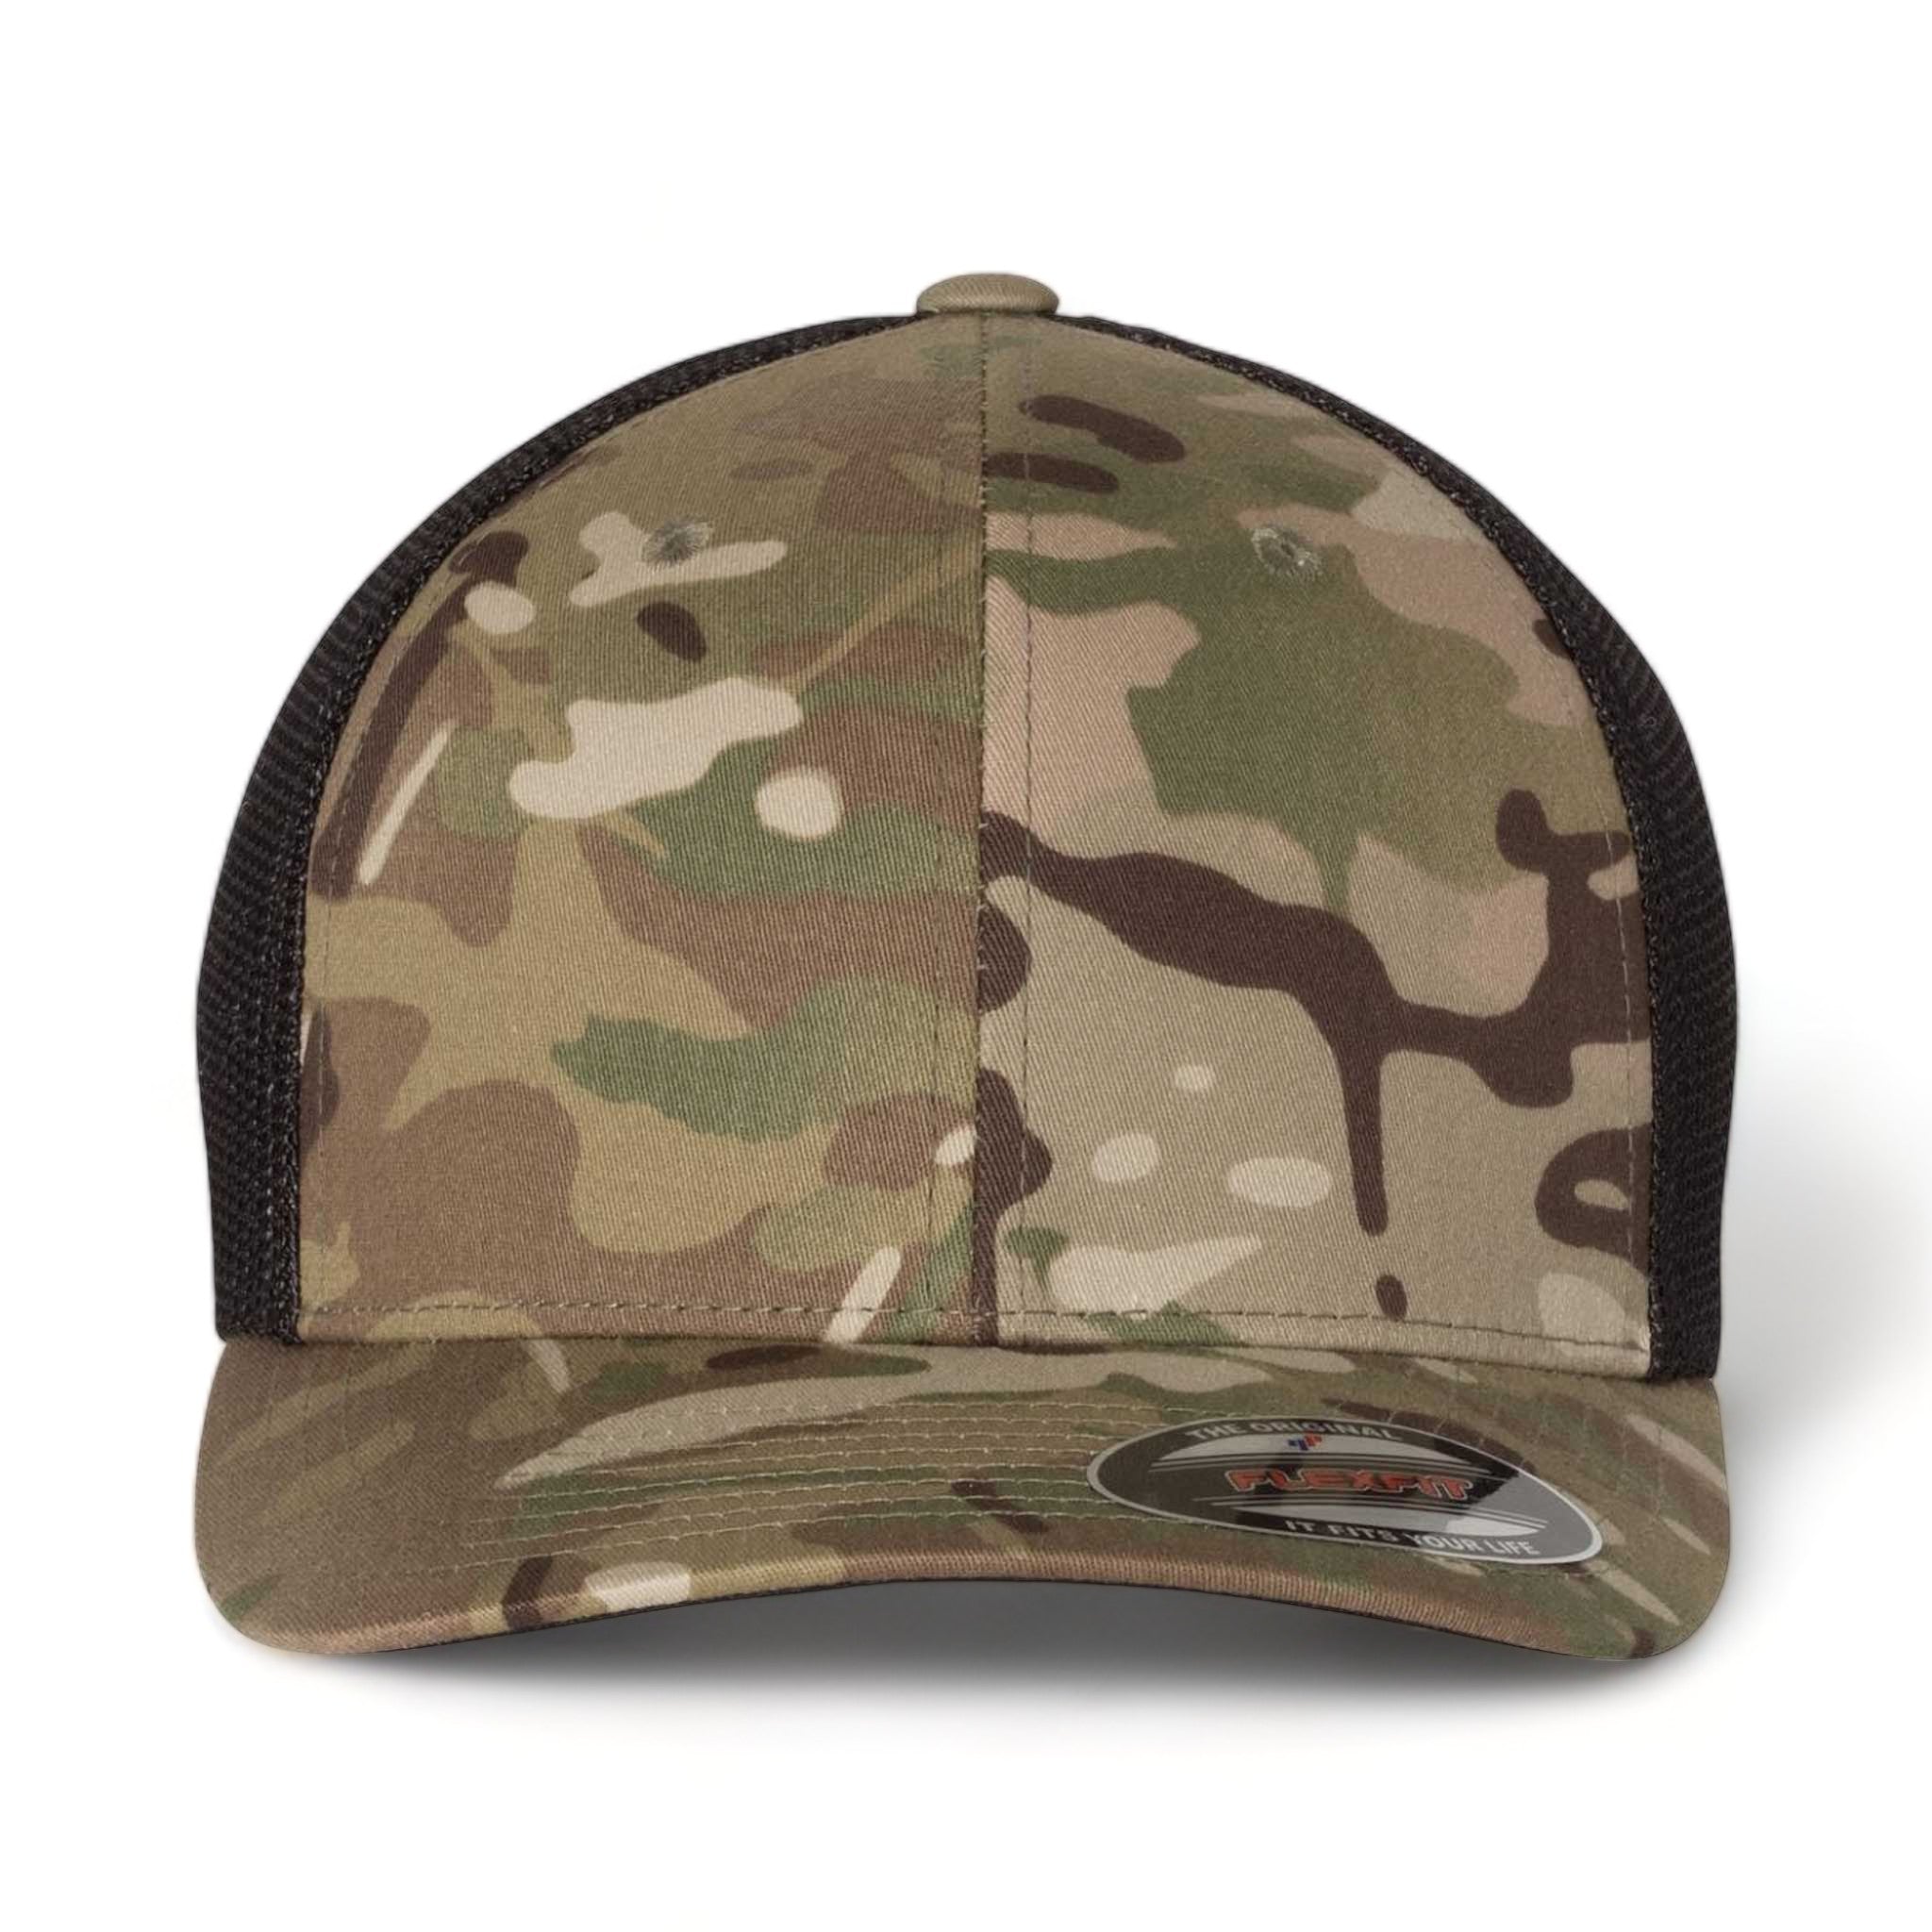 Front view of Flexfit 6511 custom hat in multicam green and black